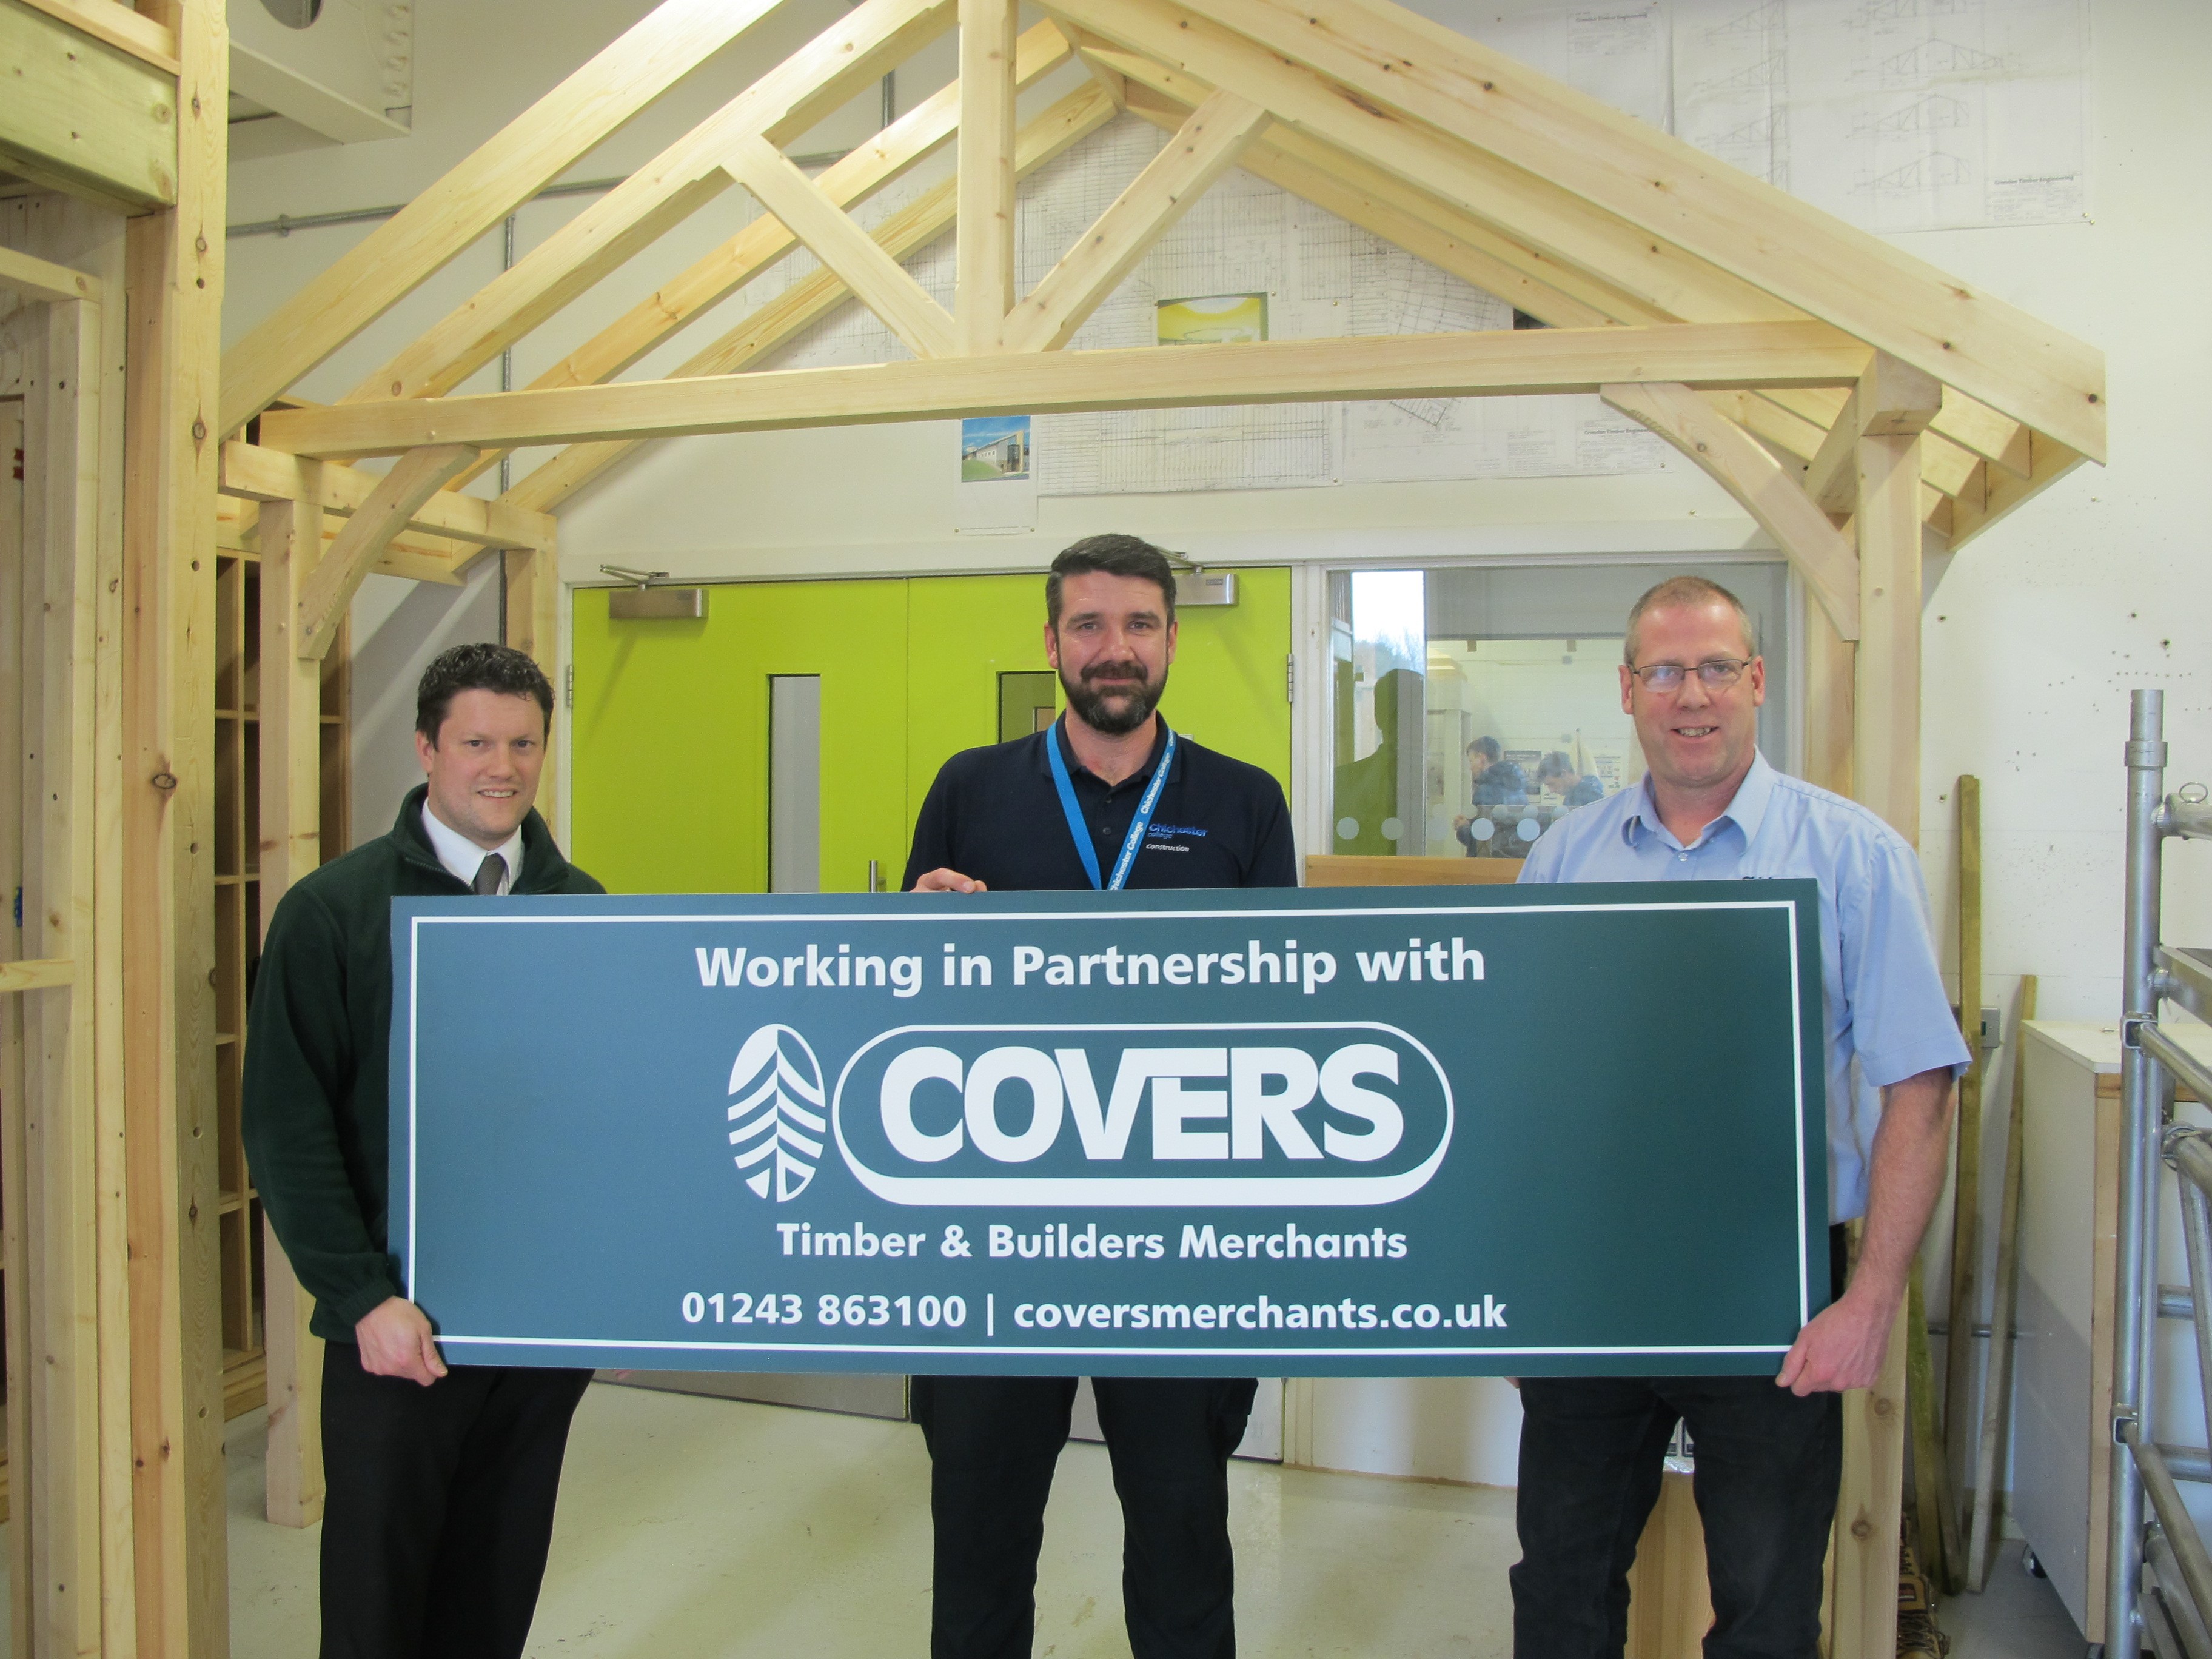 Chichester College's carpentry course benefits from donation of materials